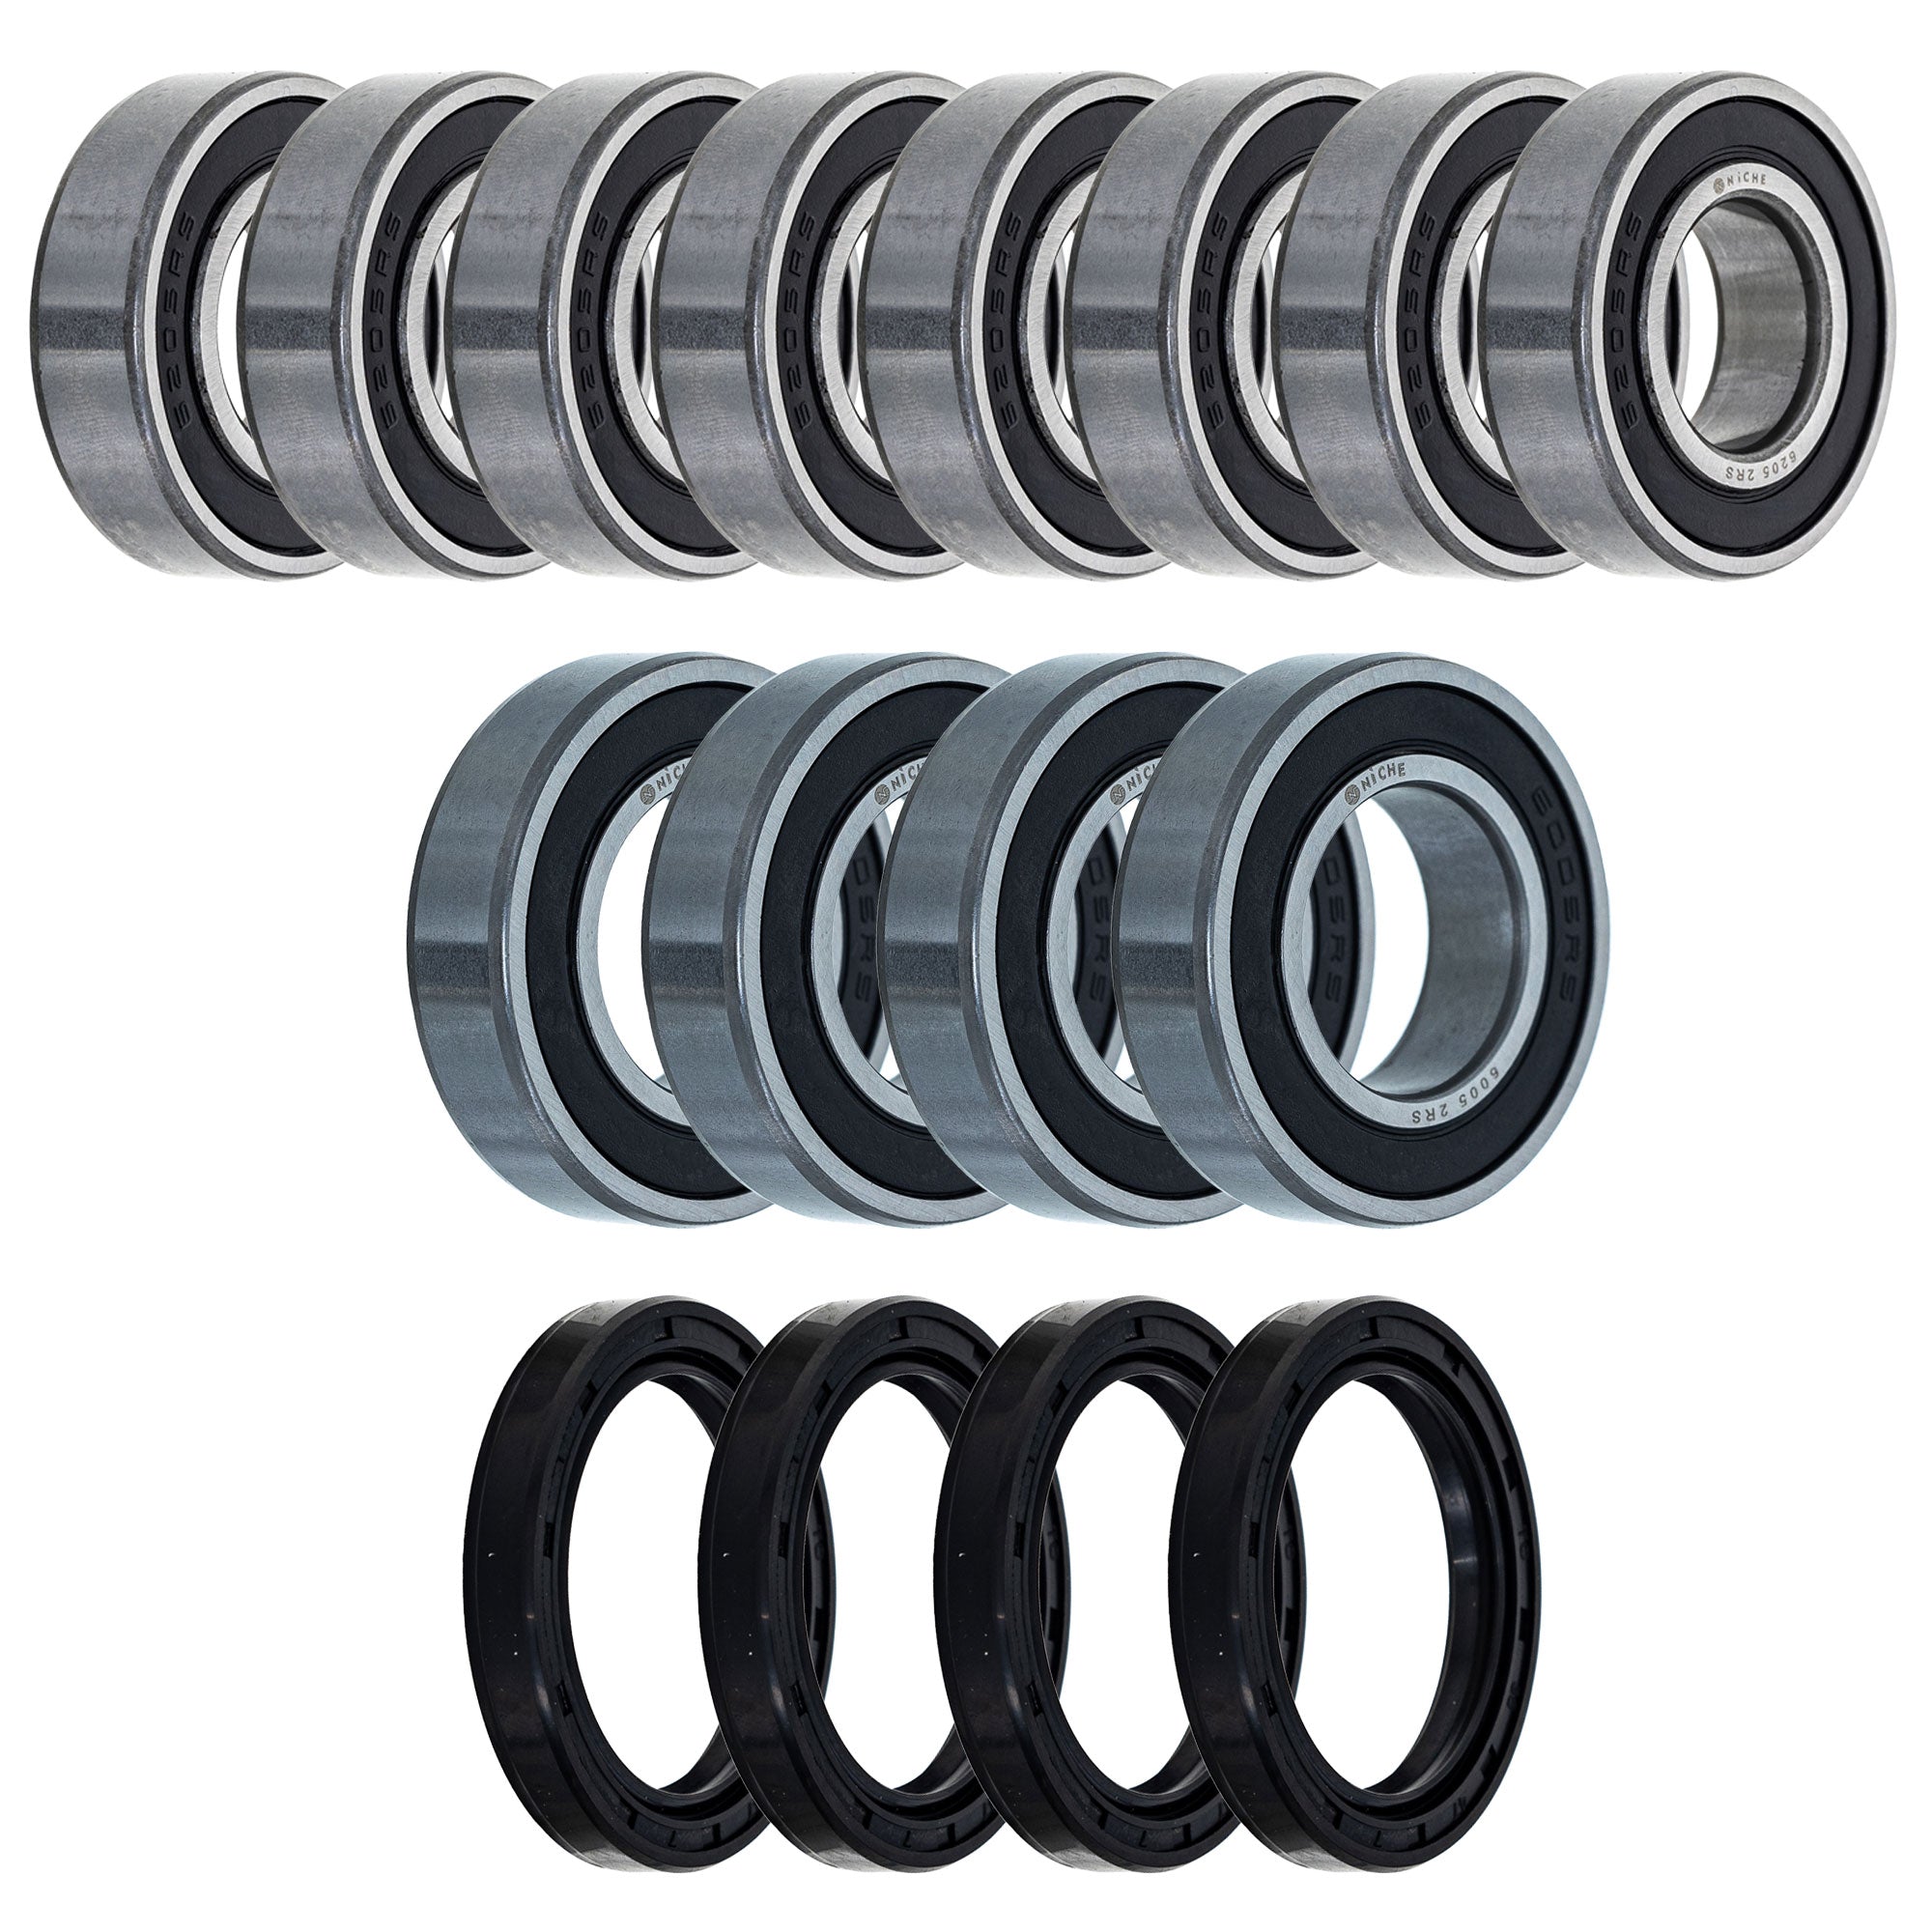 Wheel Bearing Seal Kit for zOTHER Ref No Mule NICHE MK1008398